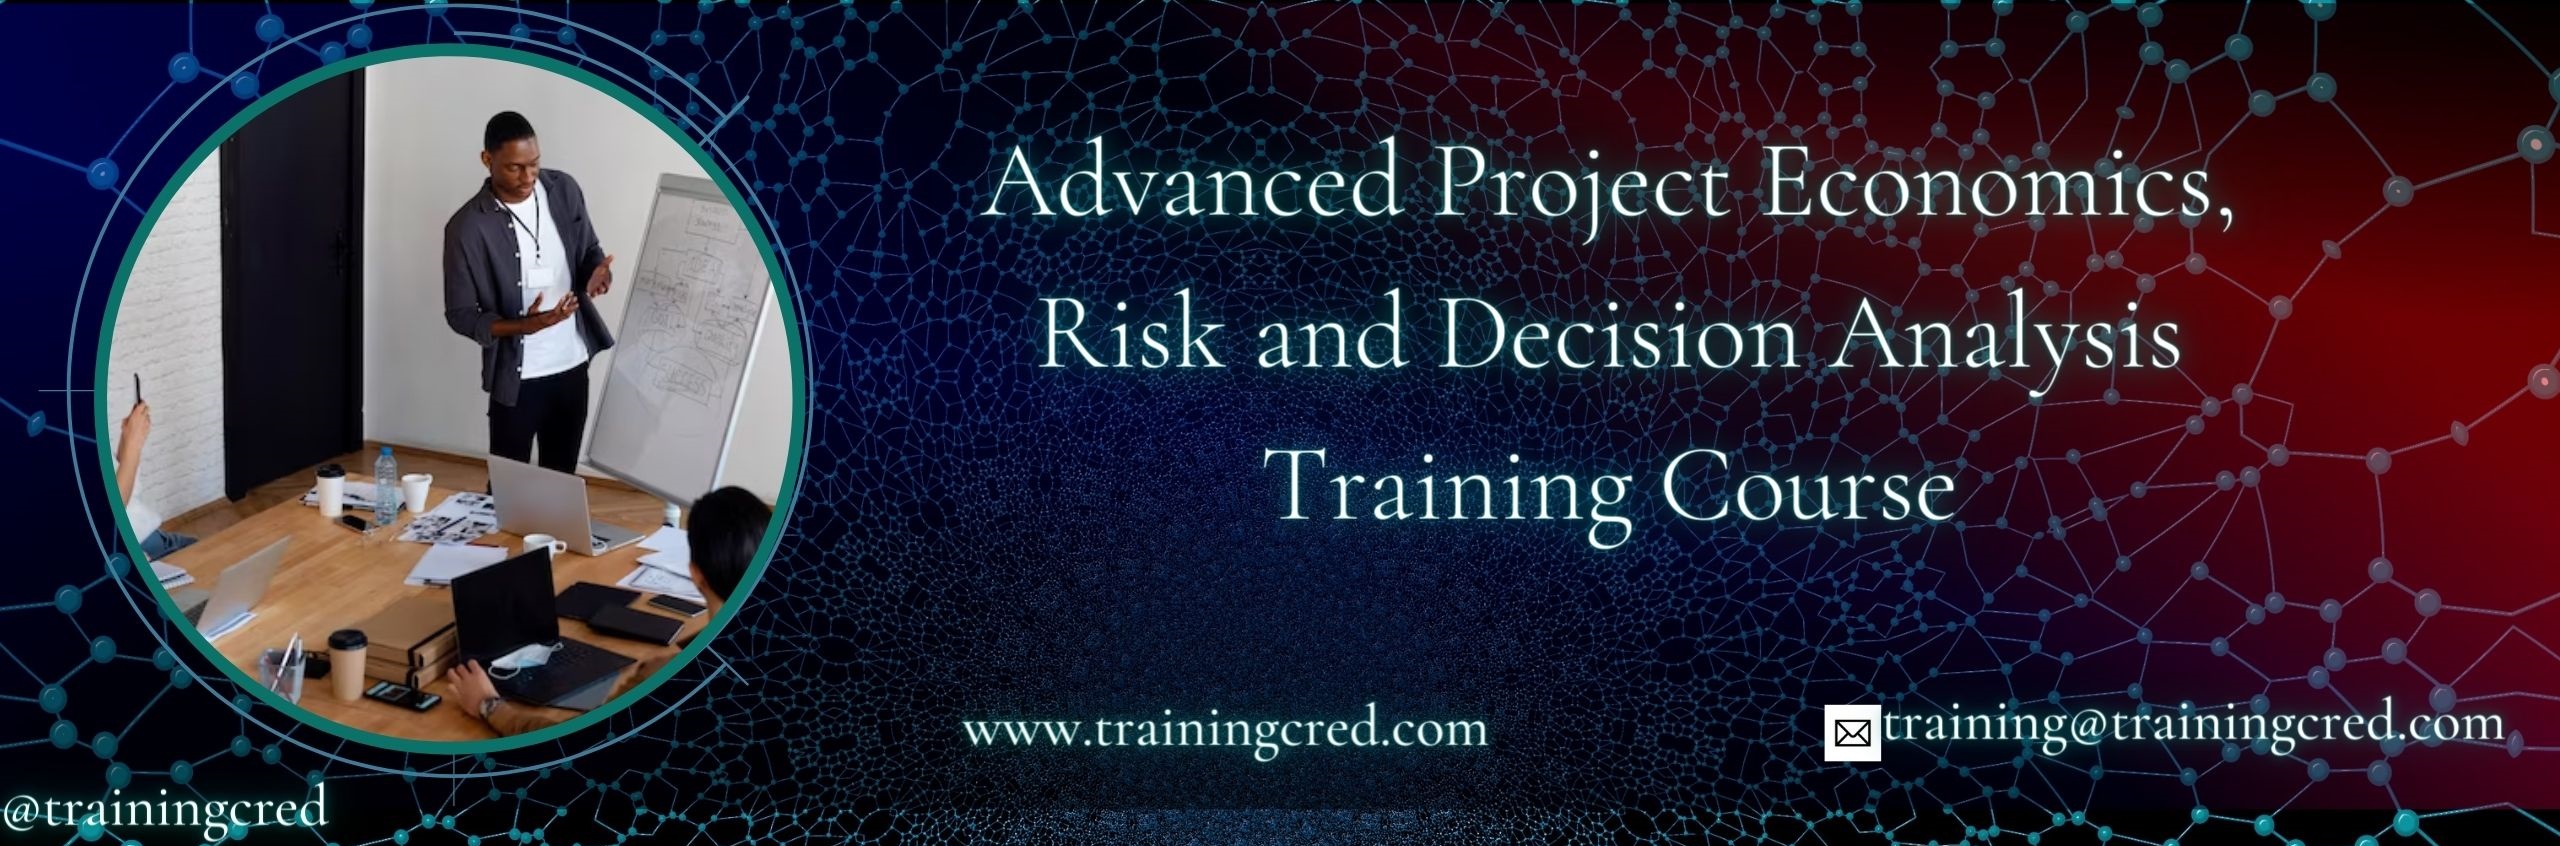 Advanced Project Economics, Risk and Decision Analysis Training